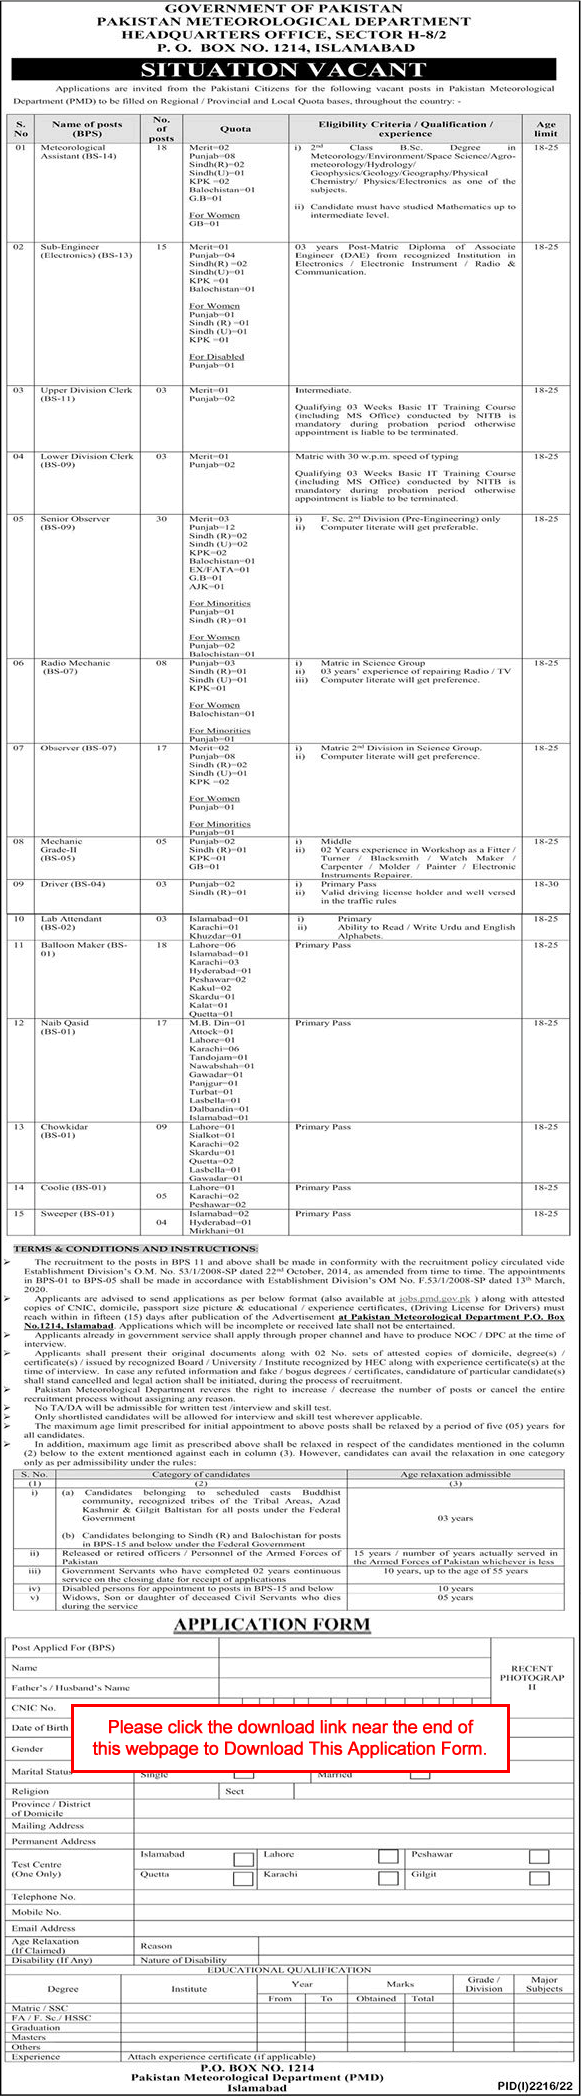 Pakistan Meteorological Department Jobs 2022 October Application Form Observers, Meteorological Assistants & Others Latest